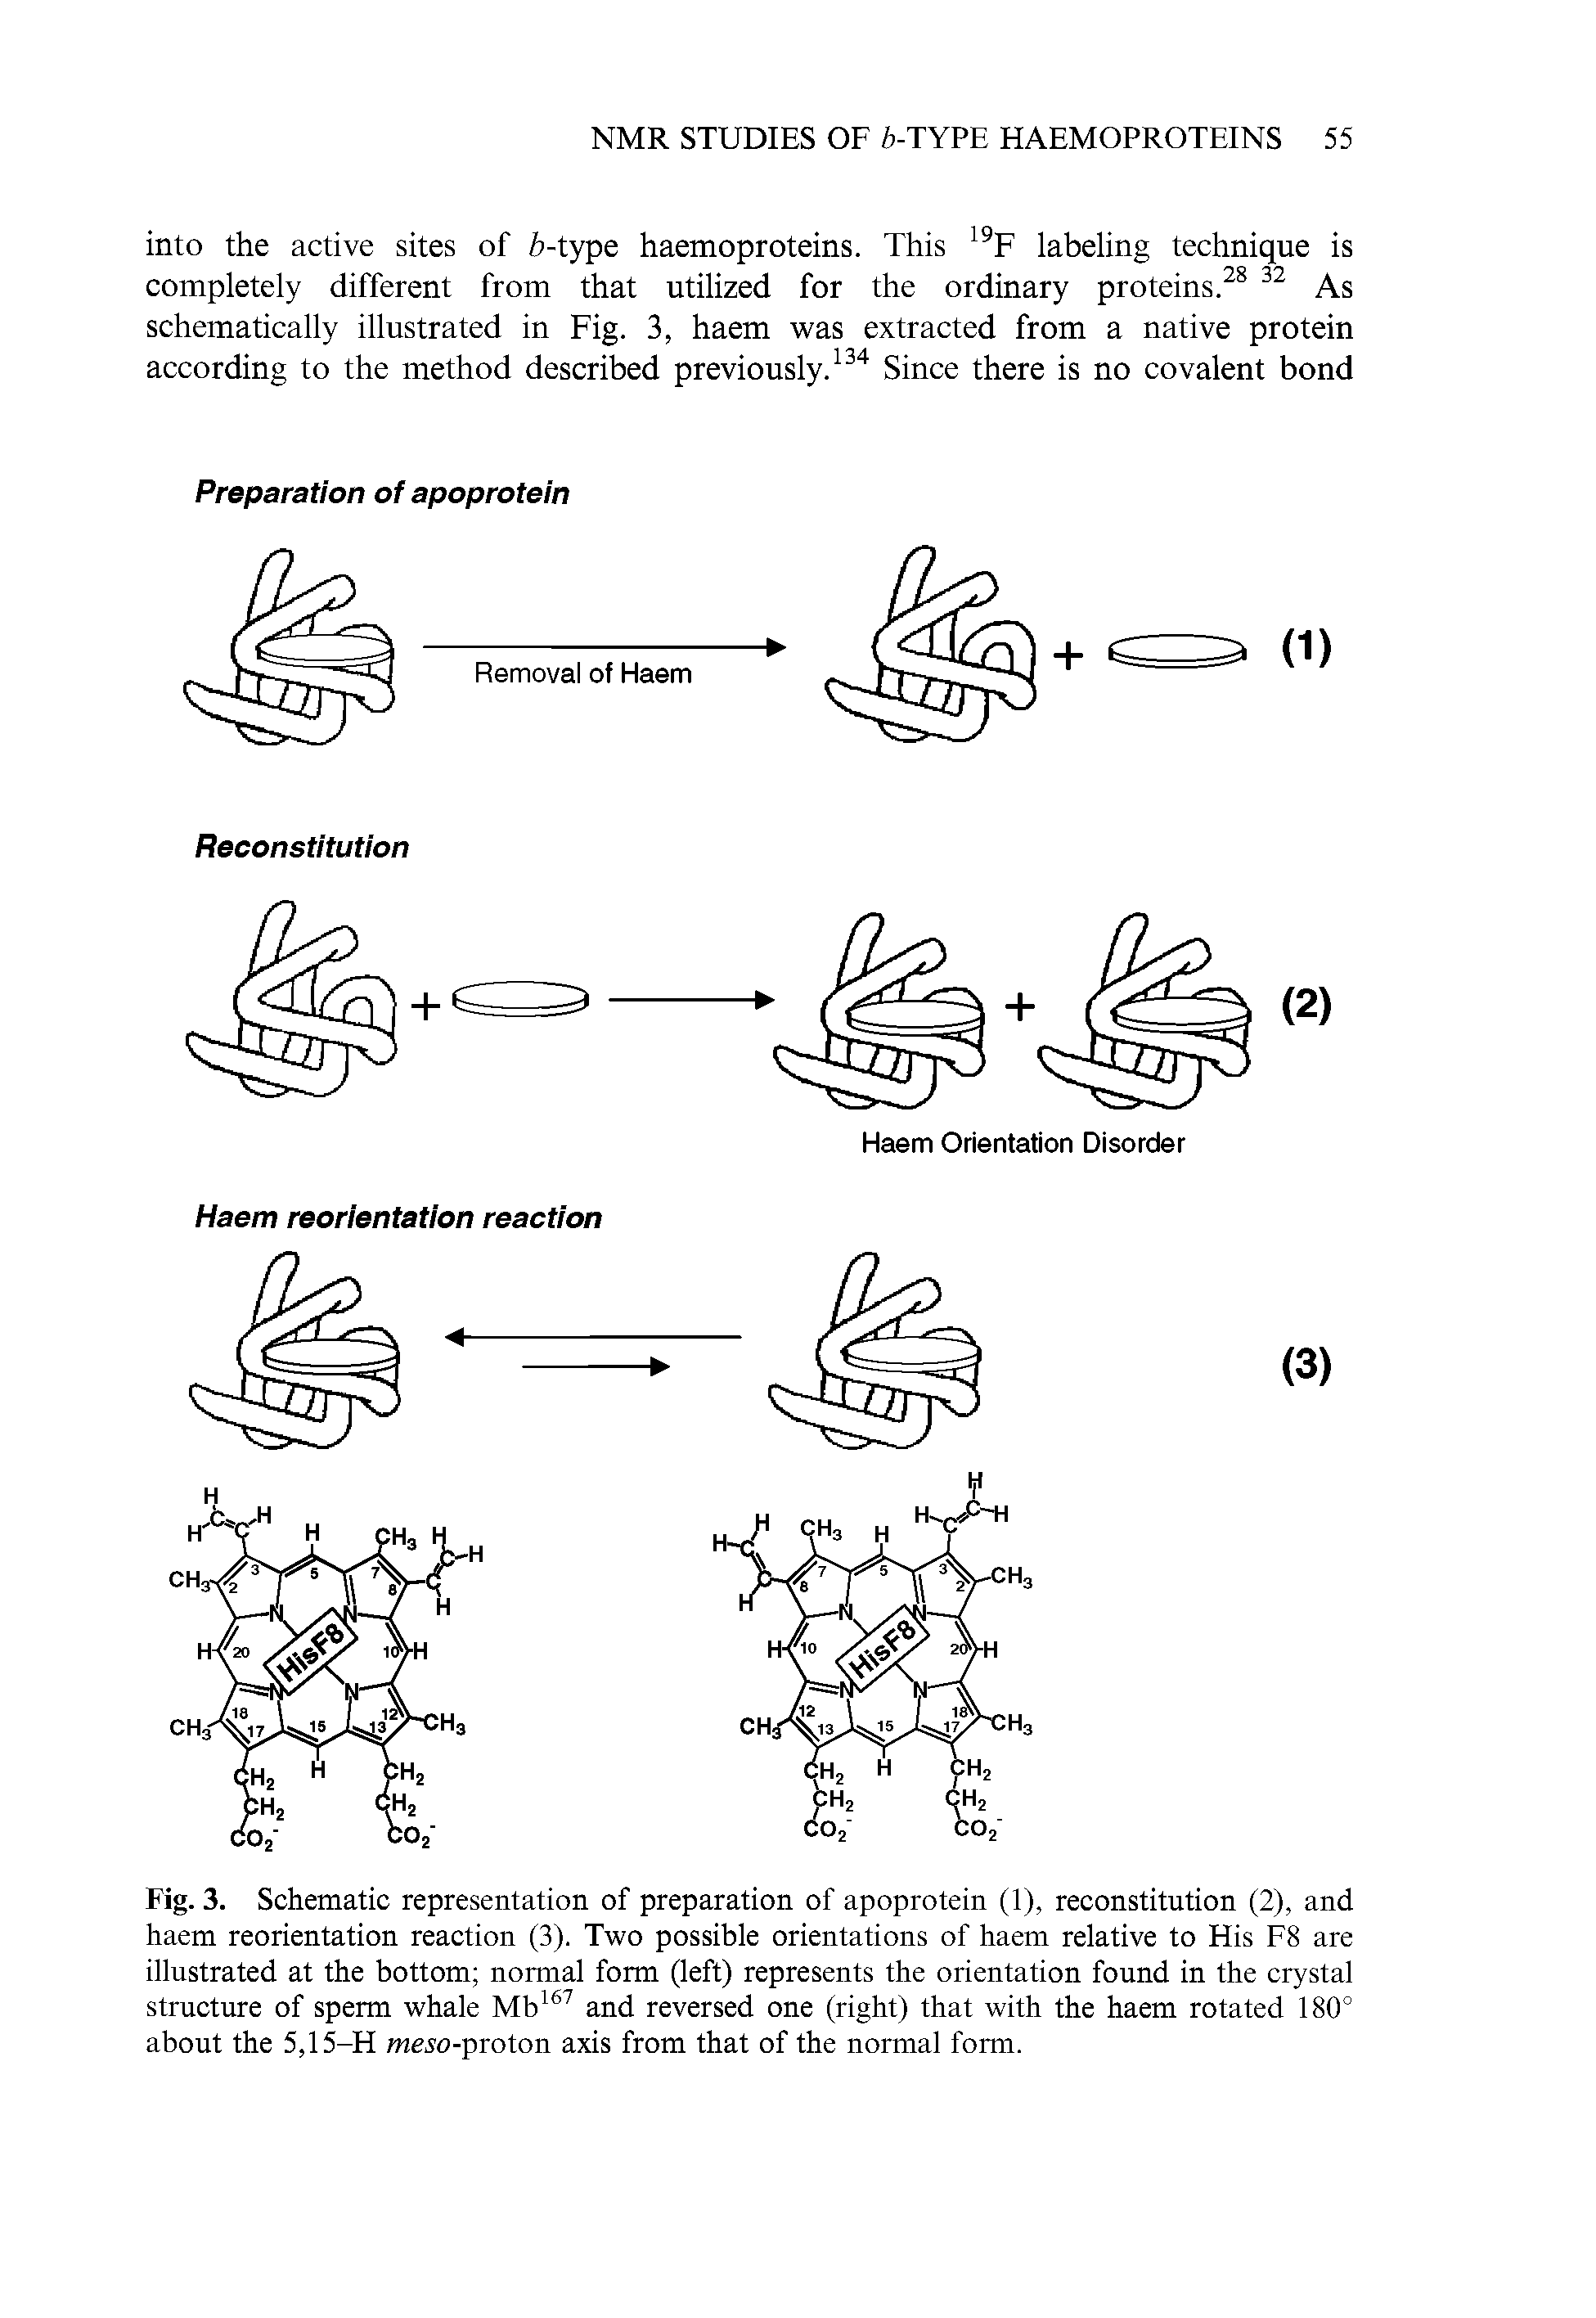 Fig. 3. Schematic representation of preparation of apoprotein (1), reconstitution (2), and haem reorientation reaction (3). Two possible orientations of haem relative to His F8 are illustrated at the bottom normal form (left) represents the orientation found in the crystal structure of sperm whale Mb and reversed one (right) that with the haem rotated 180° about the 5,15-H me o-proton axis from that of the normal form.